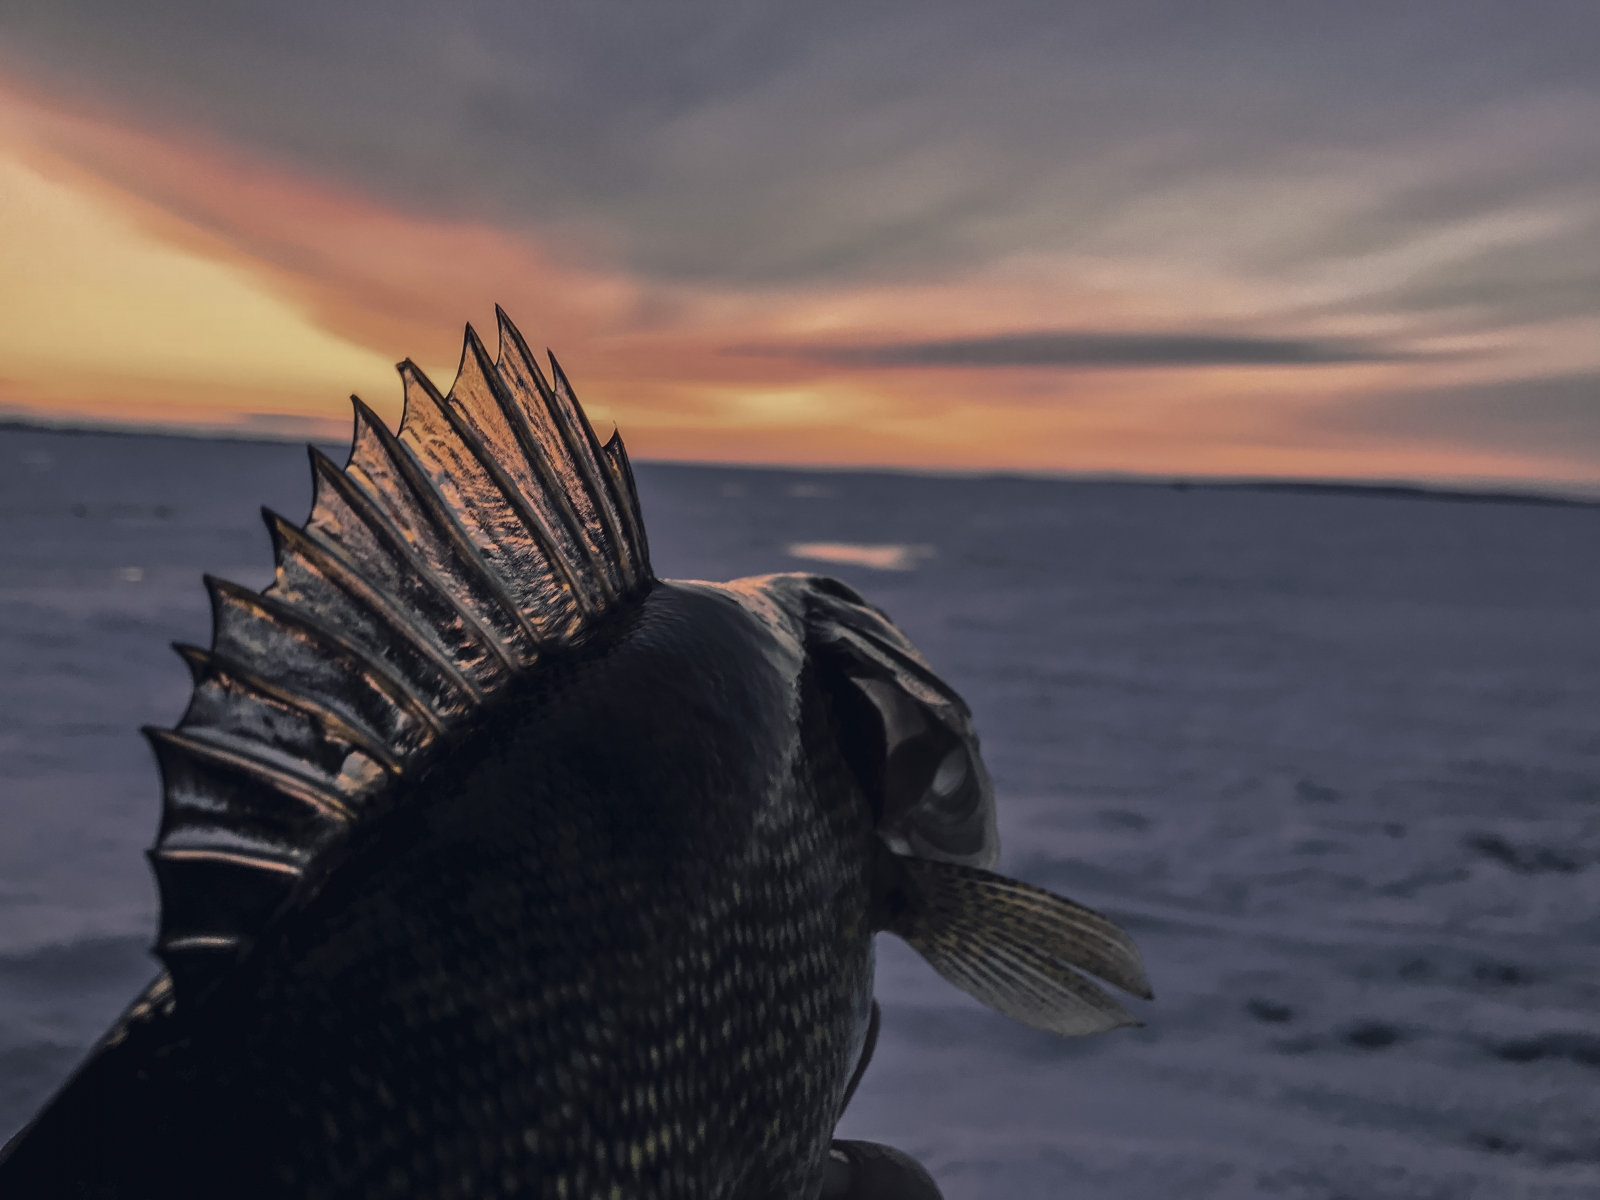 Winter Time Sunsets are Best With a Fish in Hand